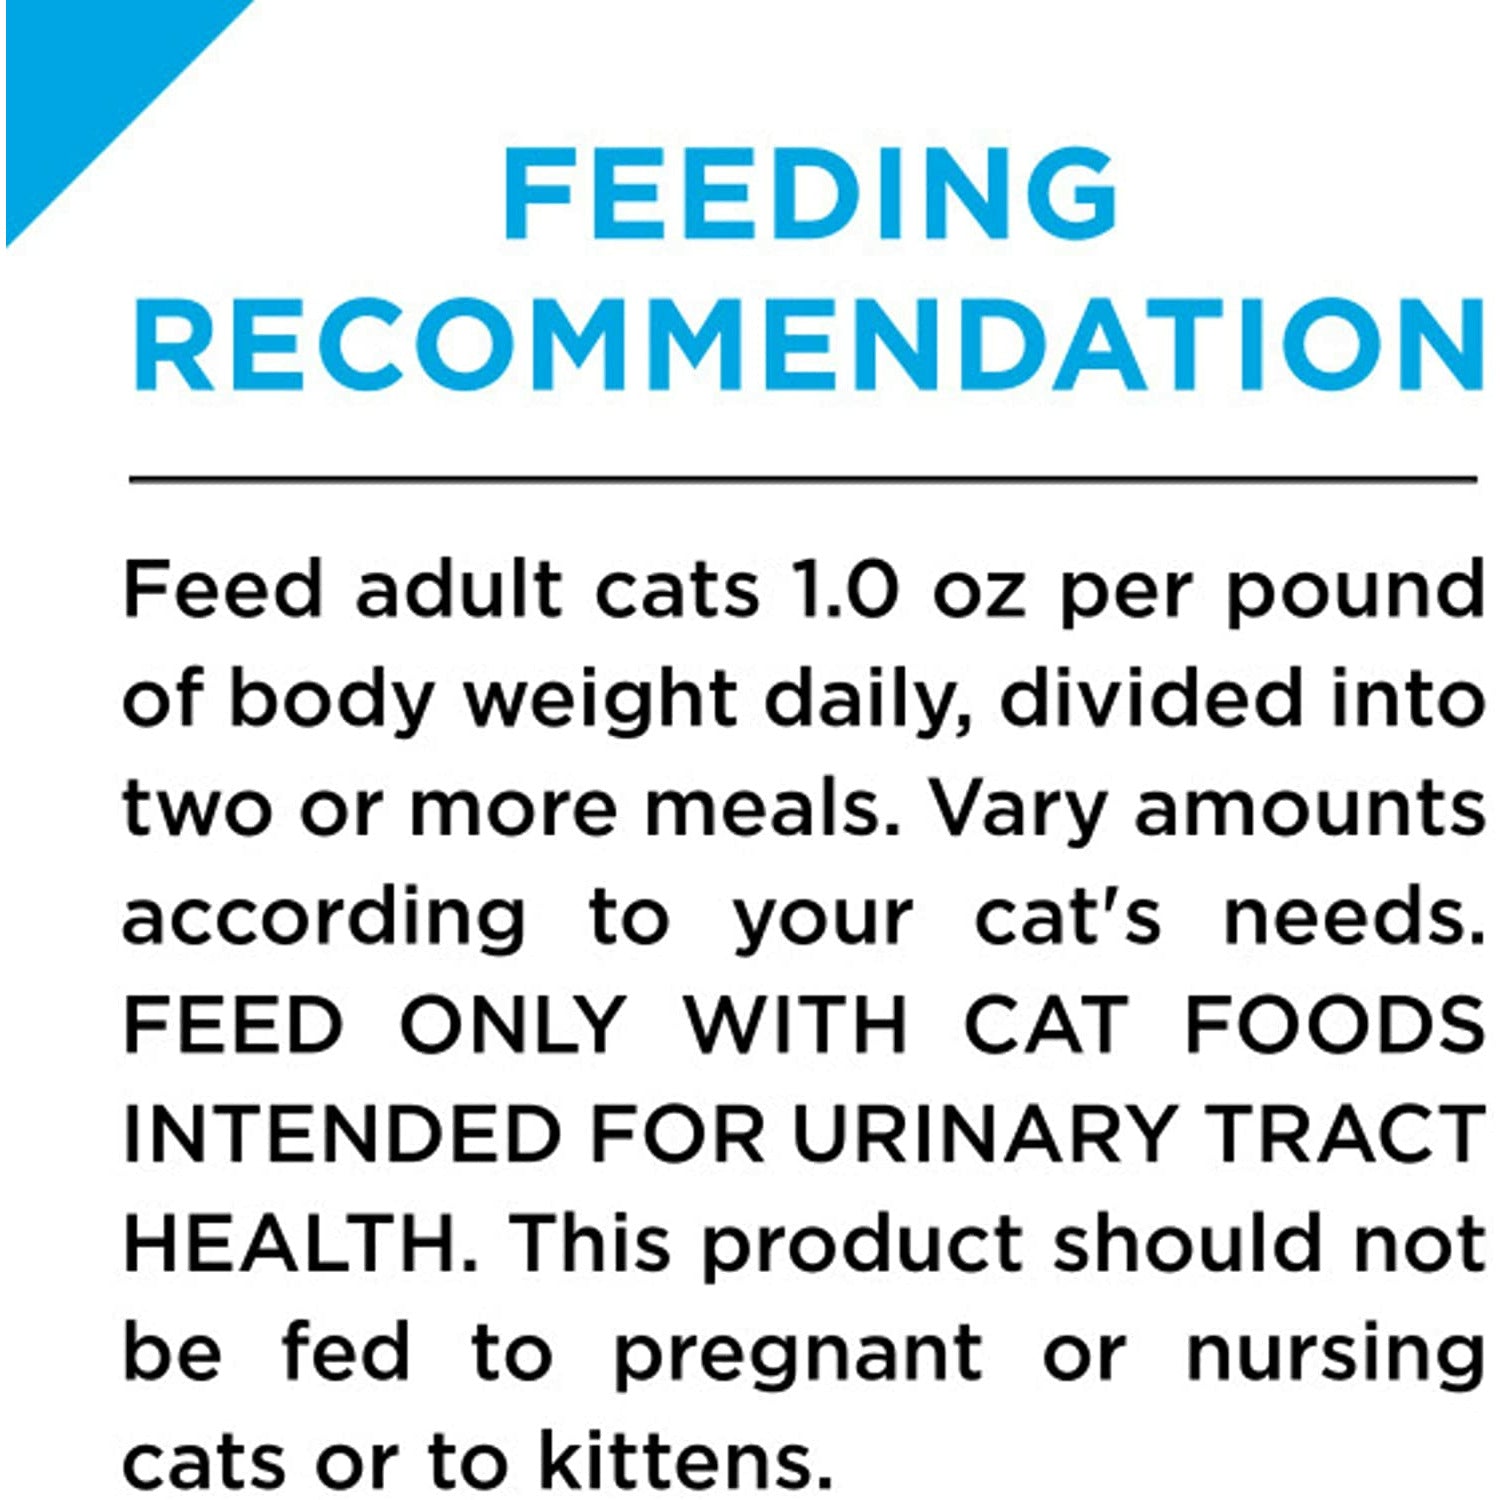 Purina Pro Plan Adult Urinary Tract Health Formula Ocean Whitefish Entrée Wet Cat Food  Canned Cat Food  | PetMax Canada